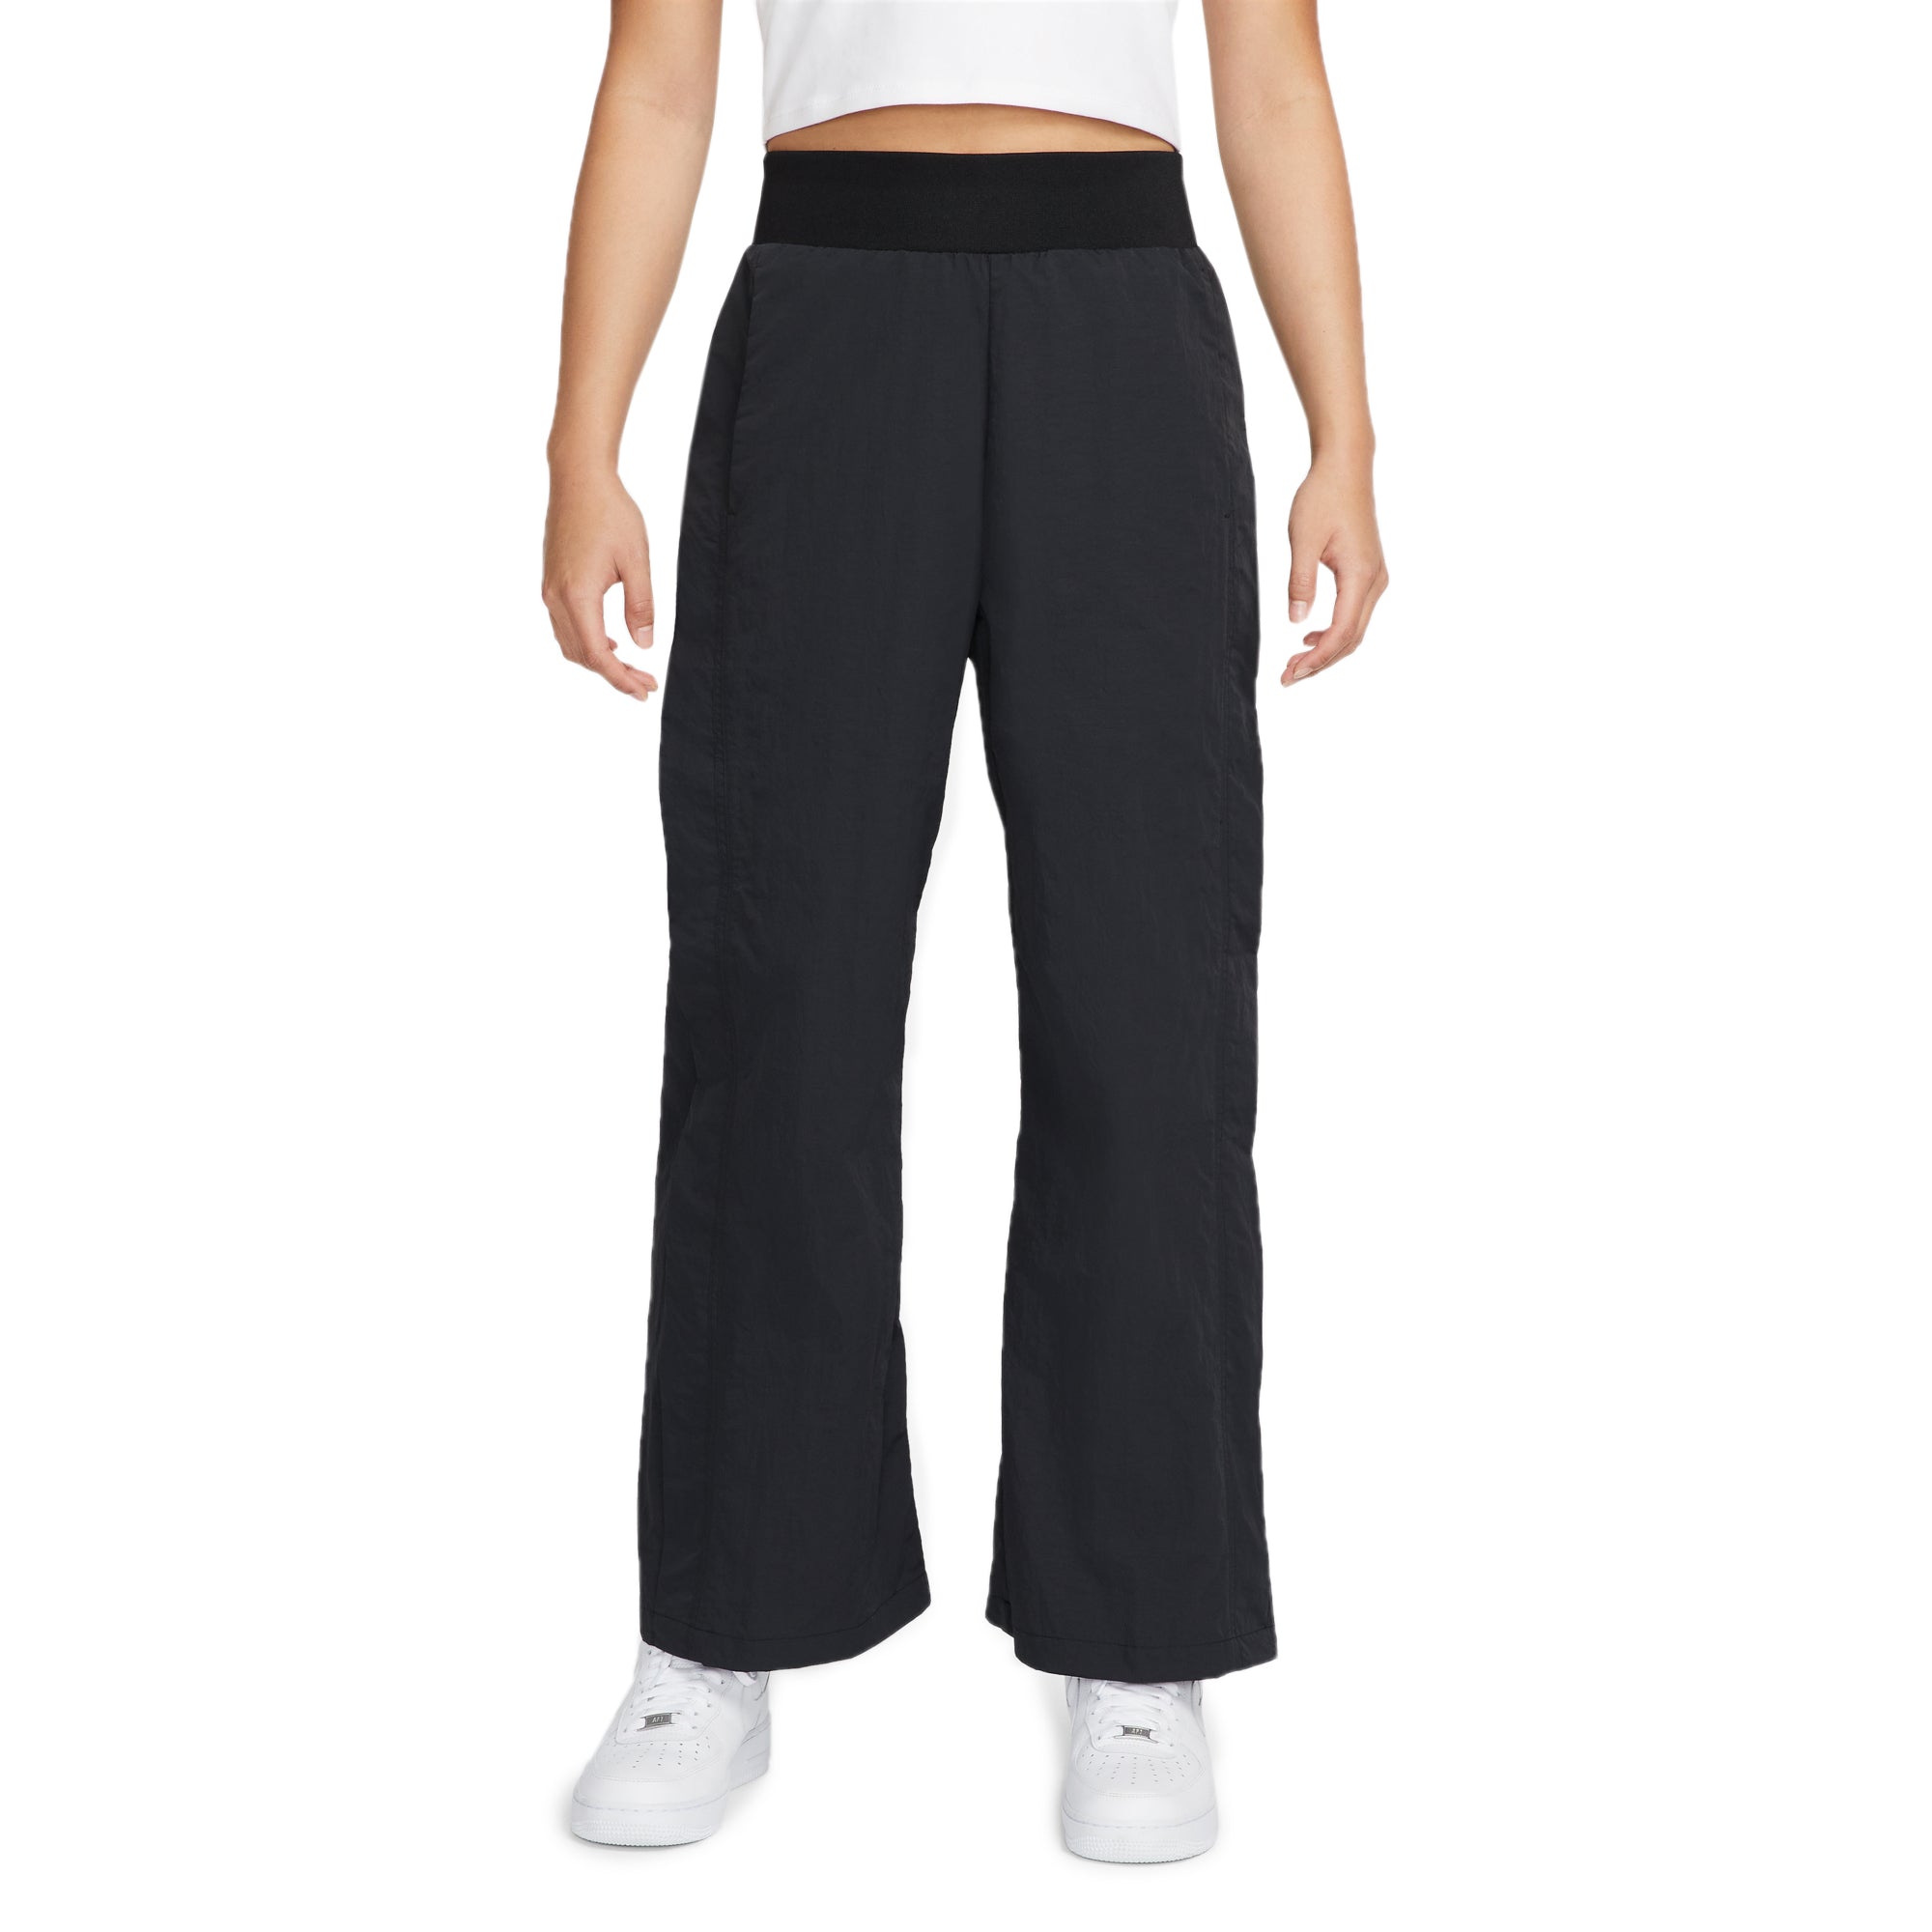 Nike Icon Clash ruched woven trousers in black